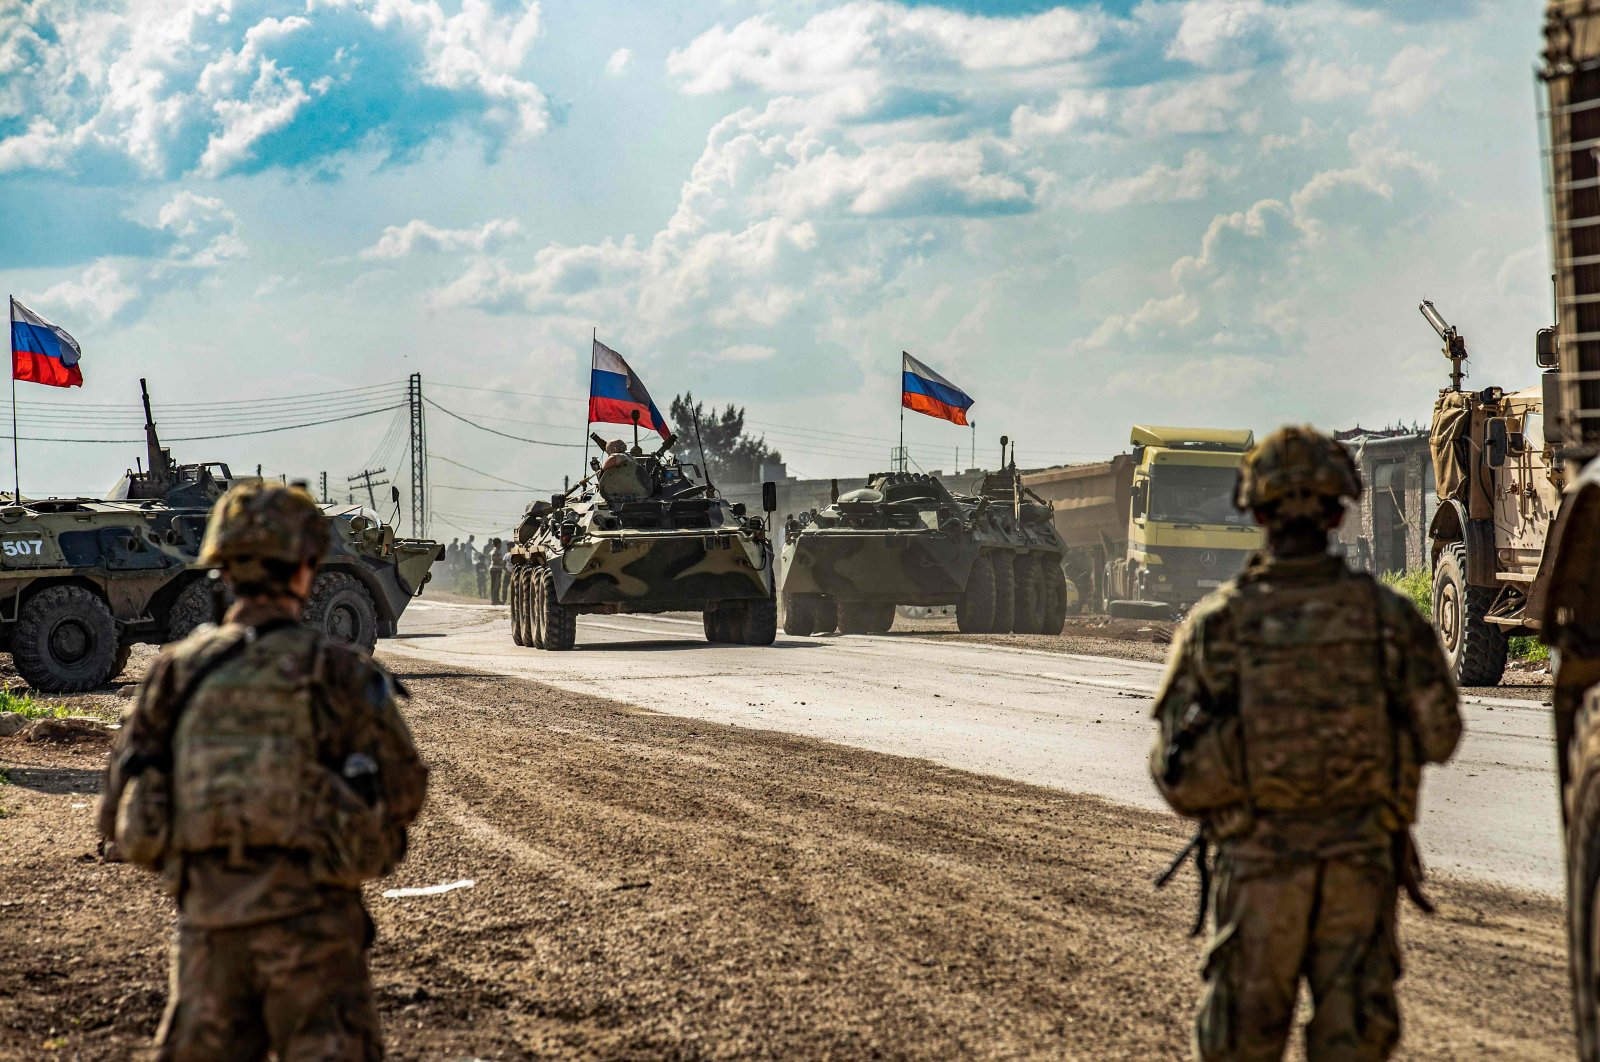 U.S. soldiers stand along a road across from Russian military armored personnel carriers (APCs), near the village of Tannuriyah, east of Qamishli, Syria, May 2, 2020. (AFP Photo)